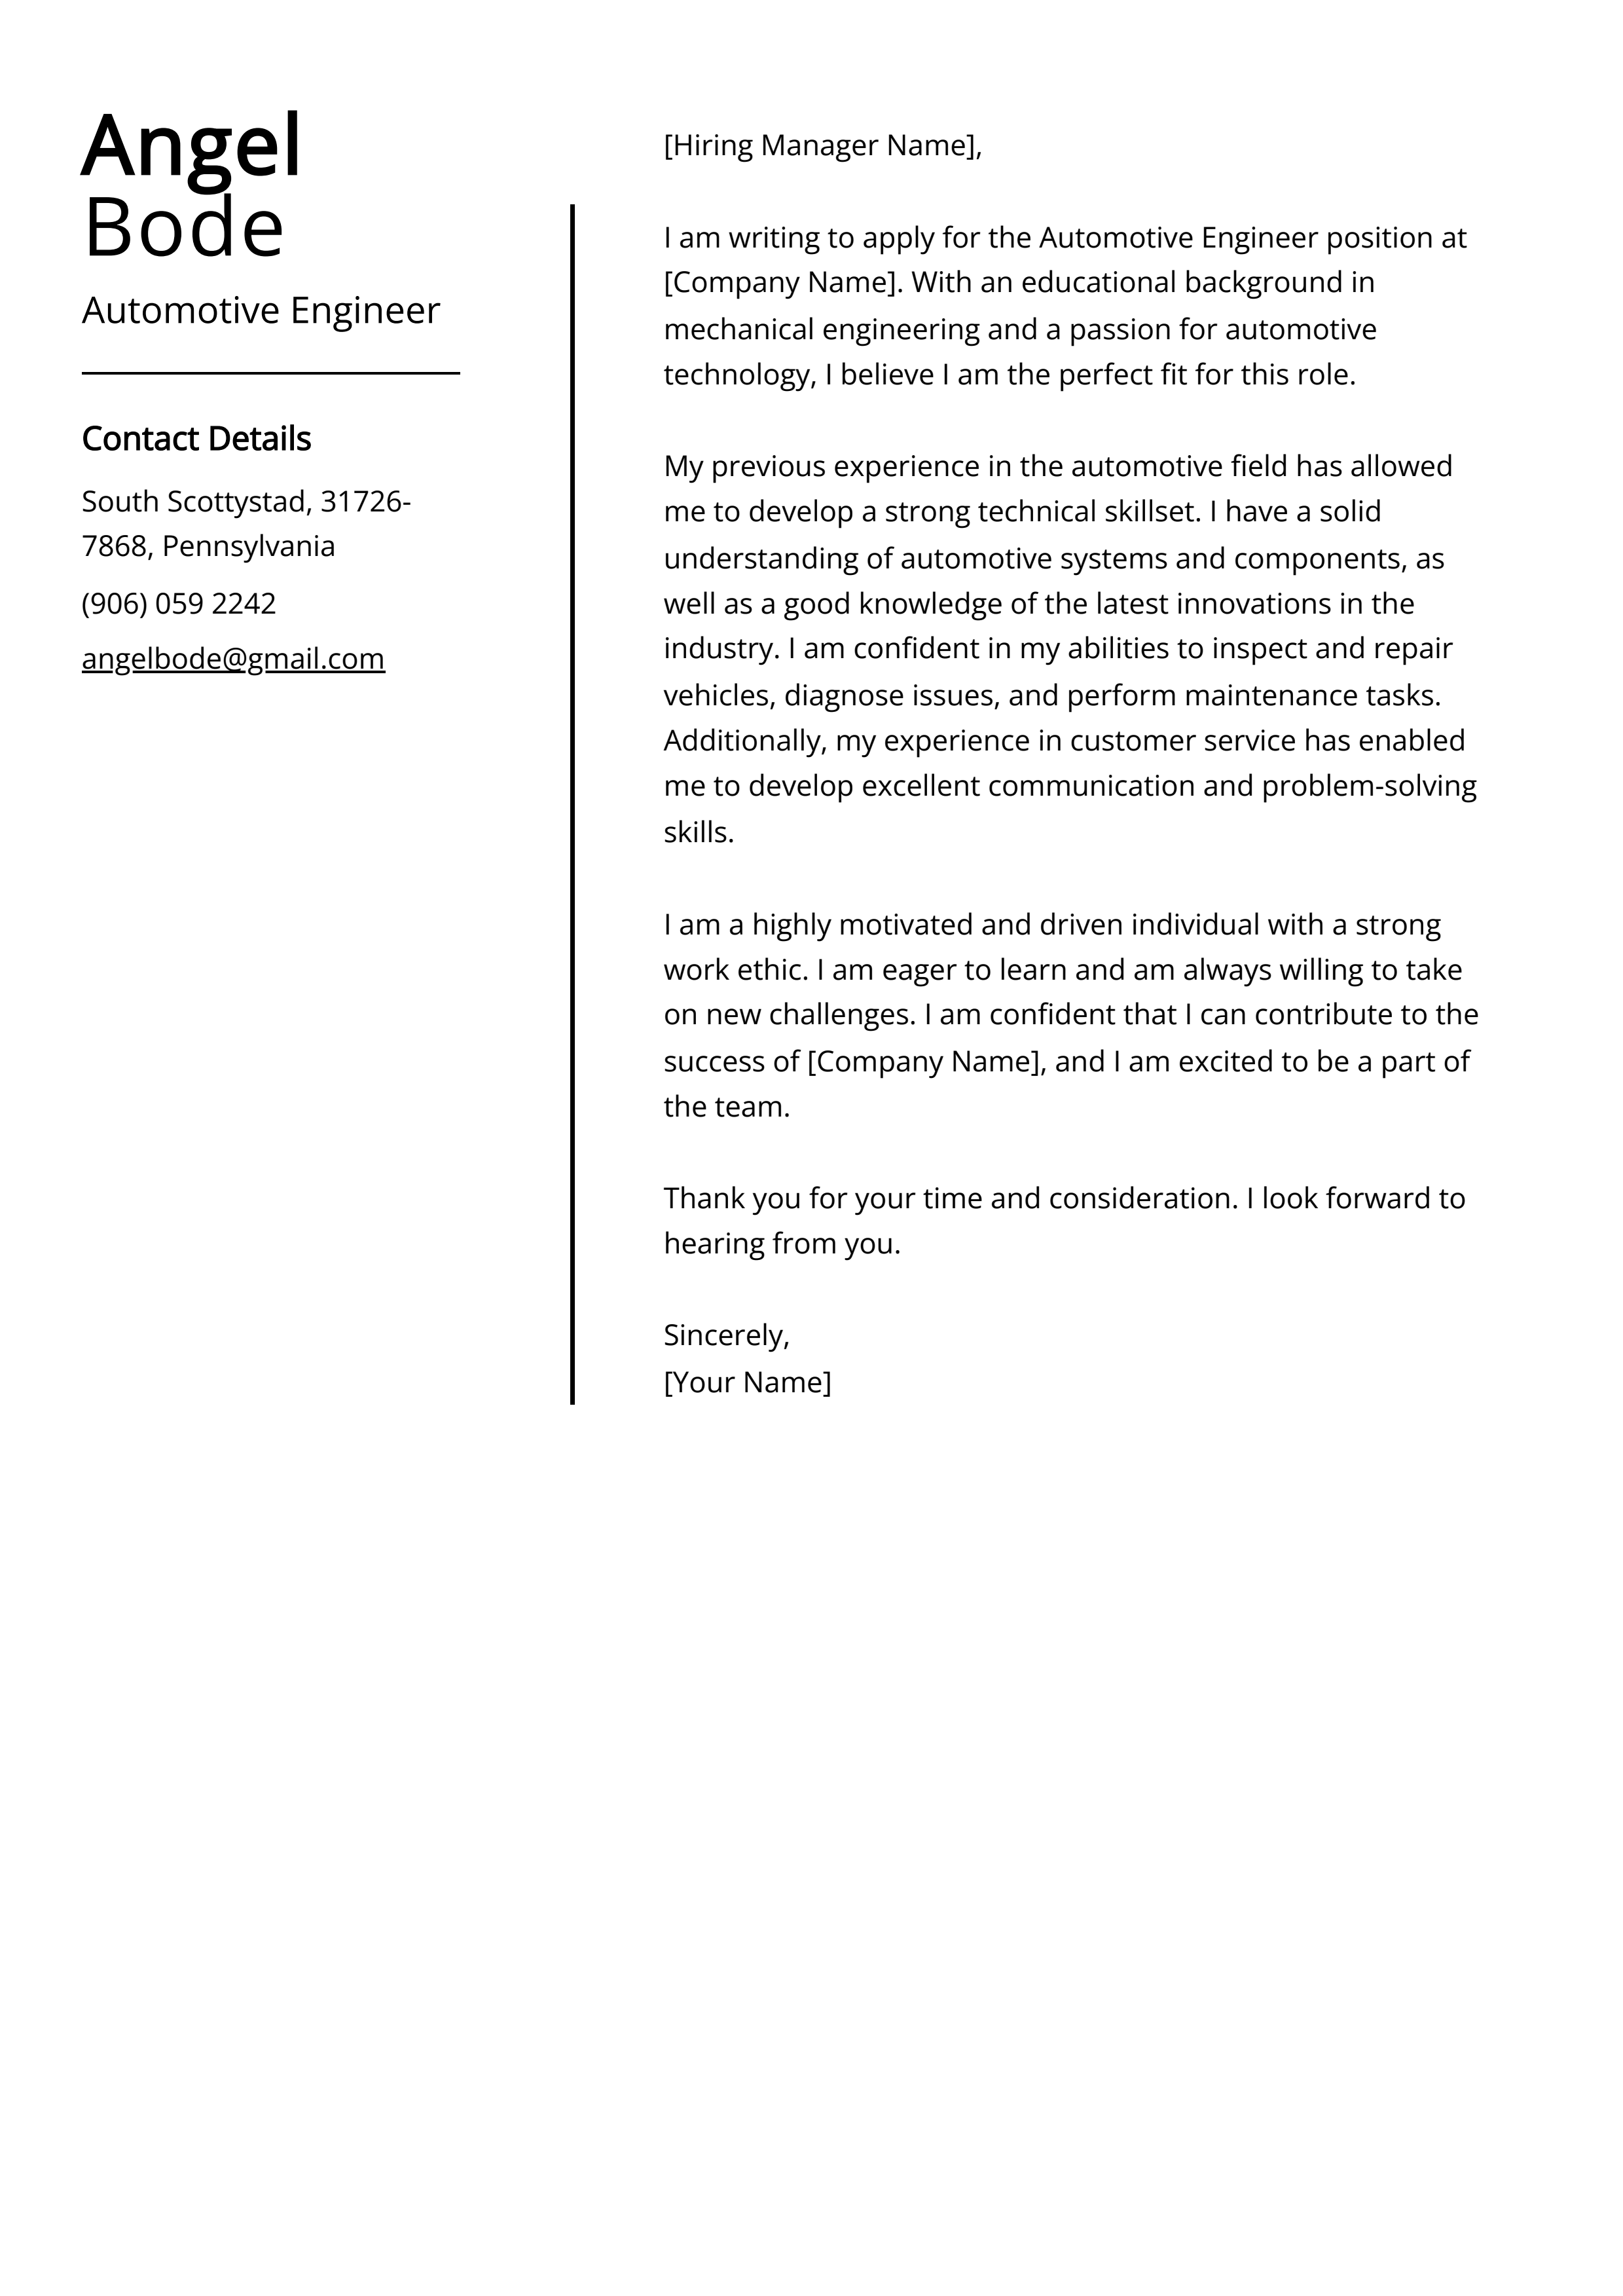 Automotive Engineer Cover Letter Example